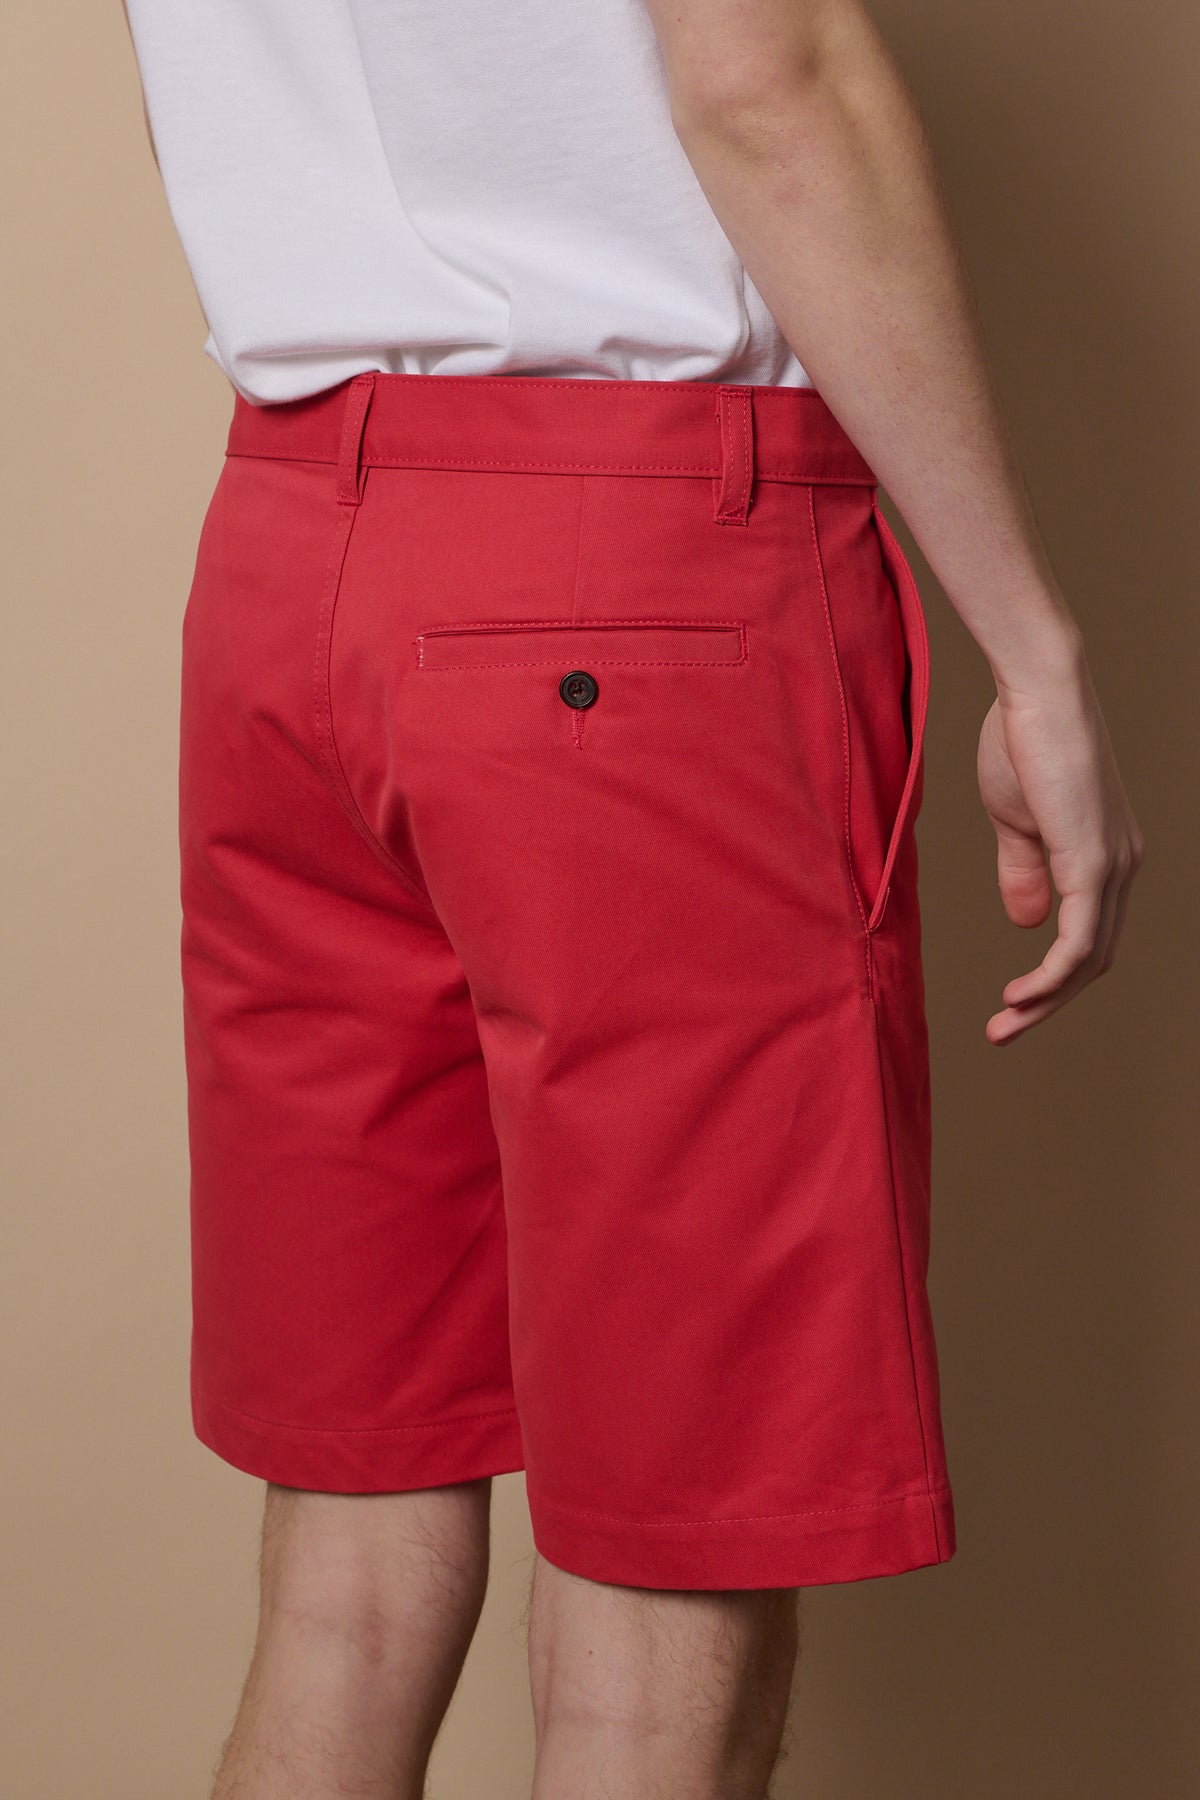 
            Back of salmon red shorts with back pocket and button